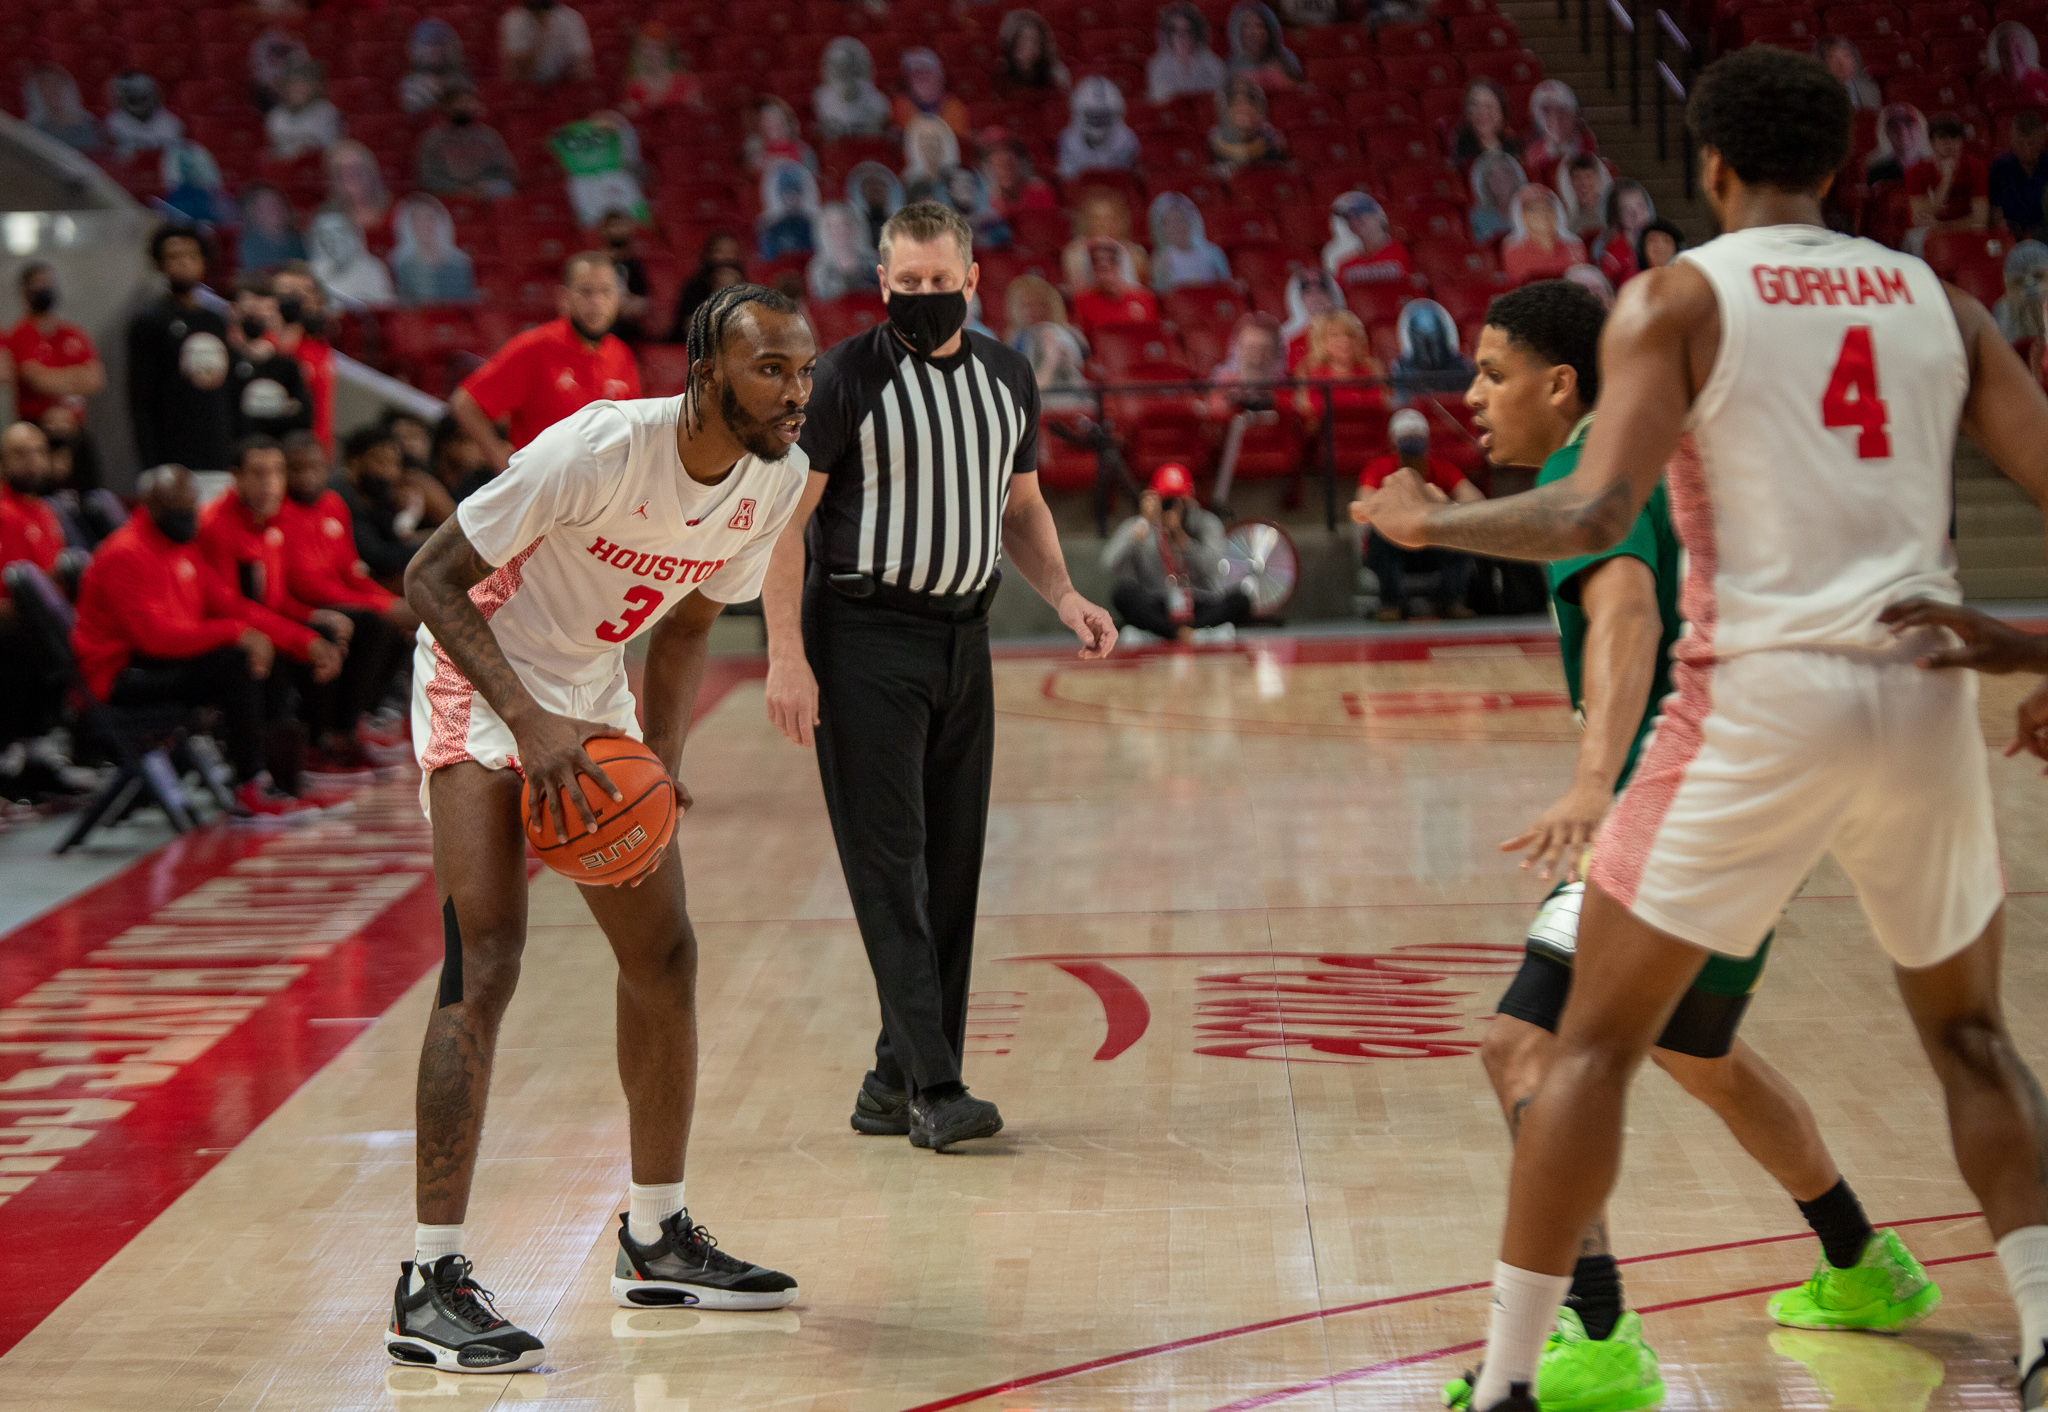 UH guard DeJon Jarreau waits for a screen from senior forward Justin Gorham. Kelvin Sampson and his team have now gone six straight seasons with 20 or more wins. | Andy Yanez/The Cougar